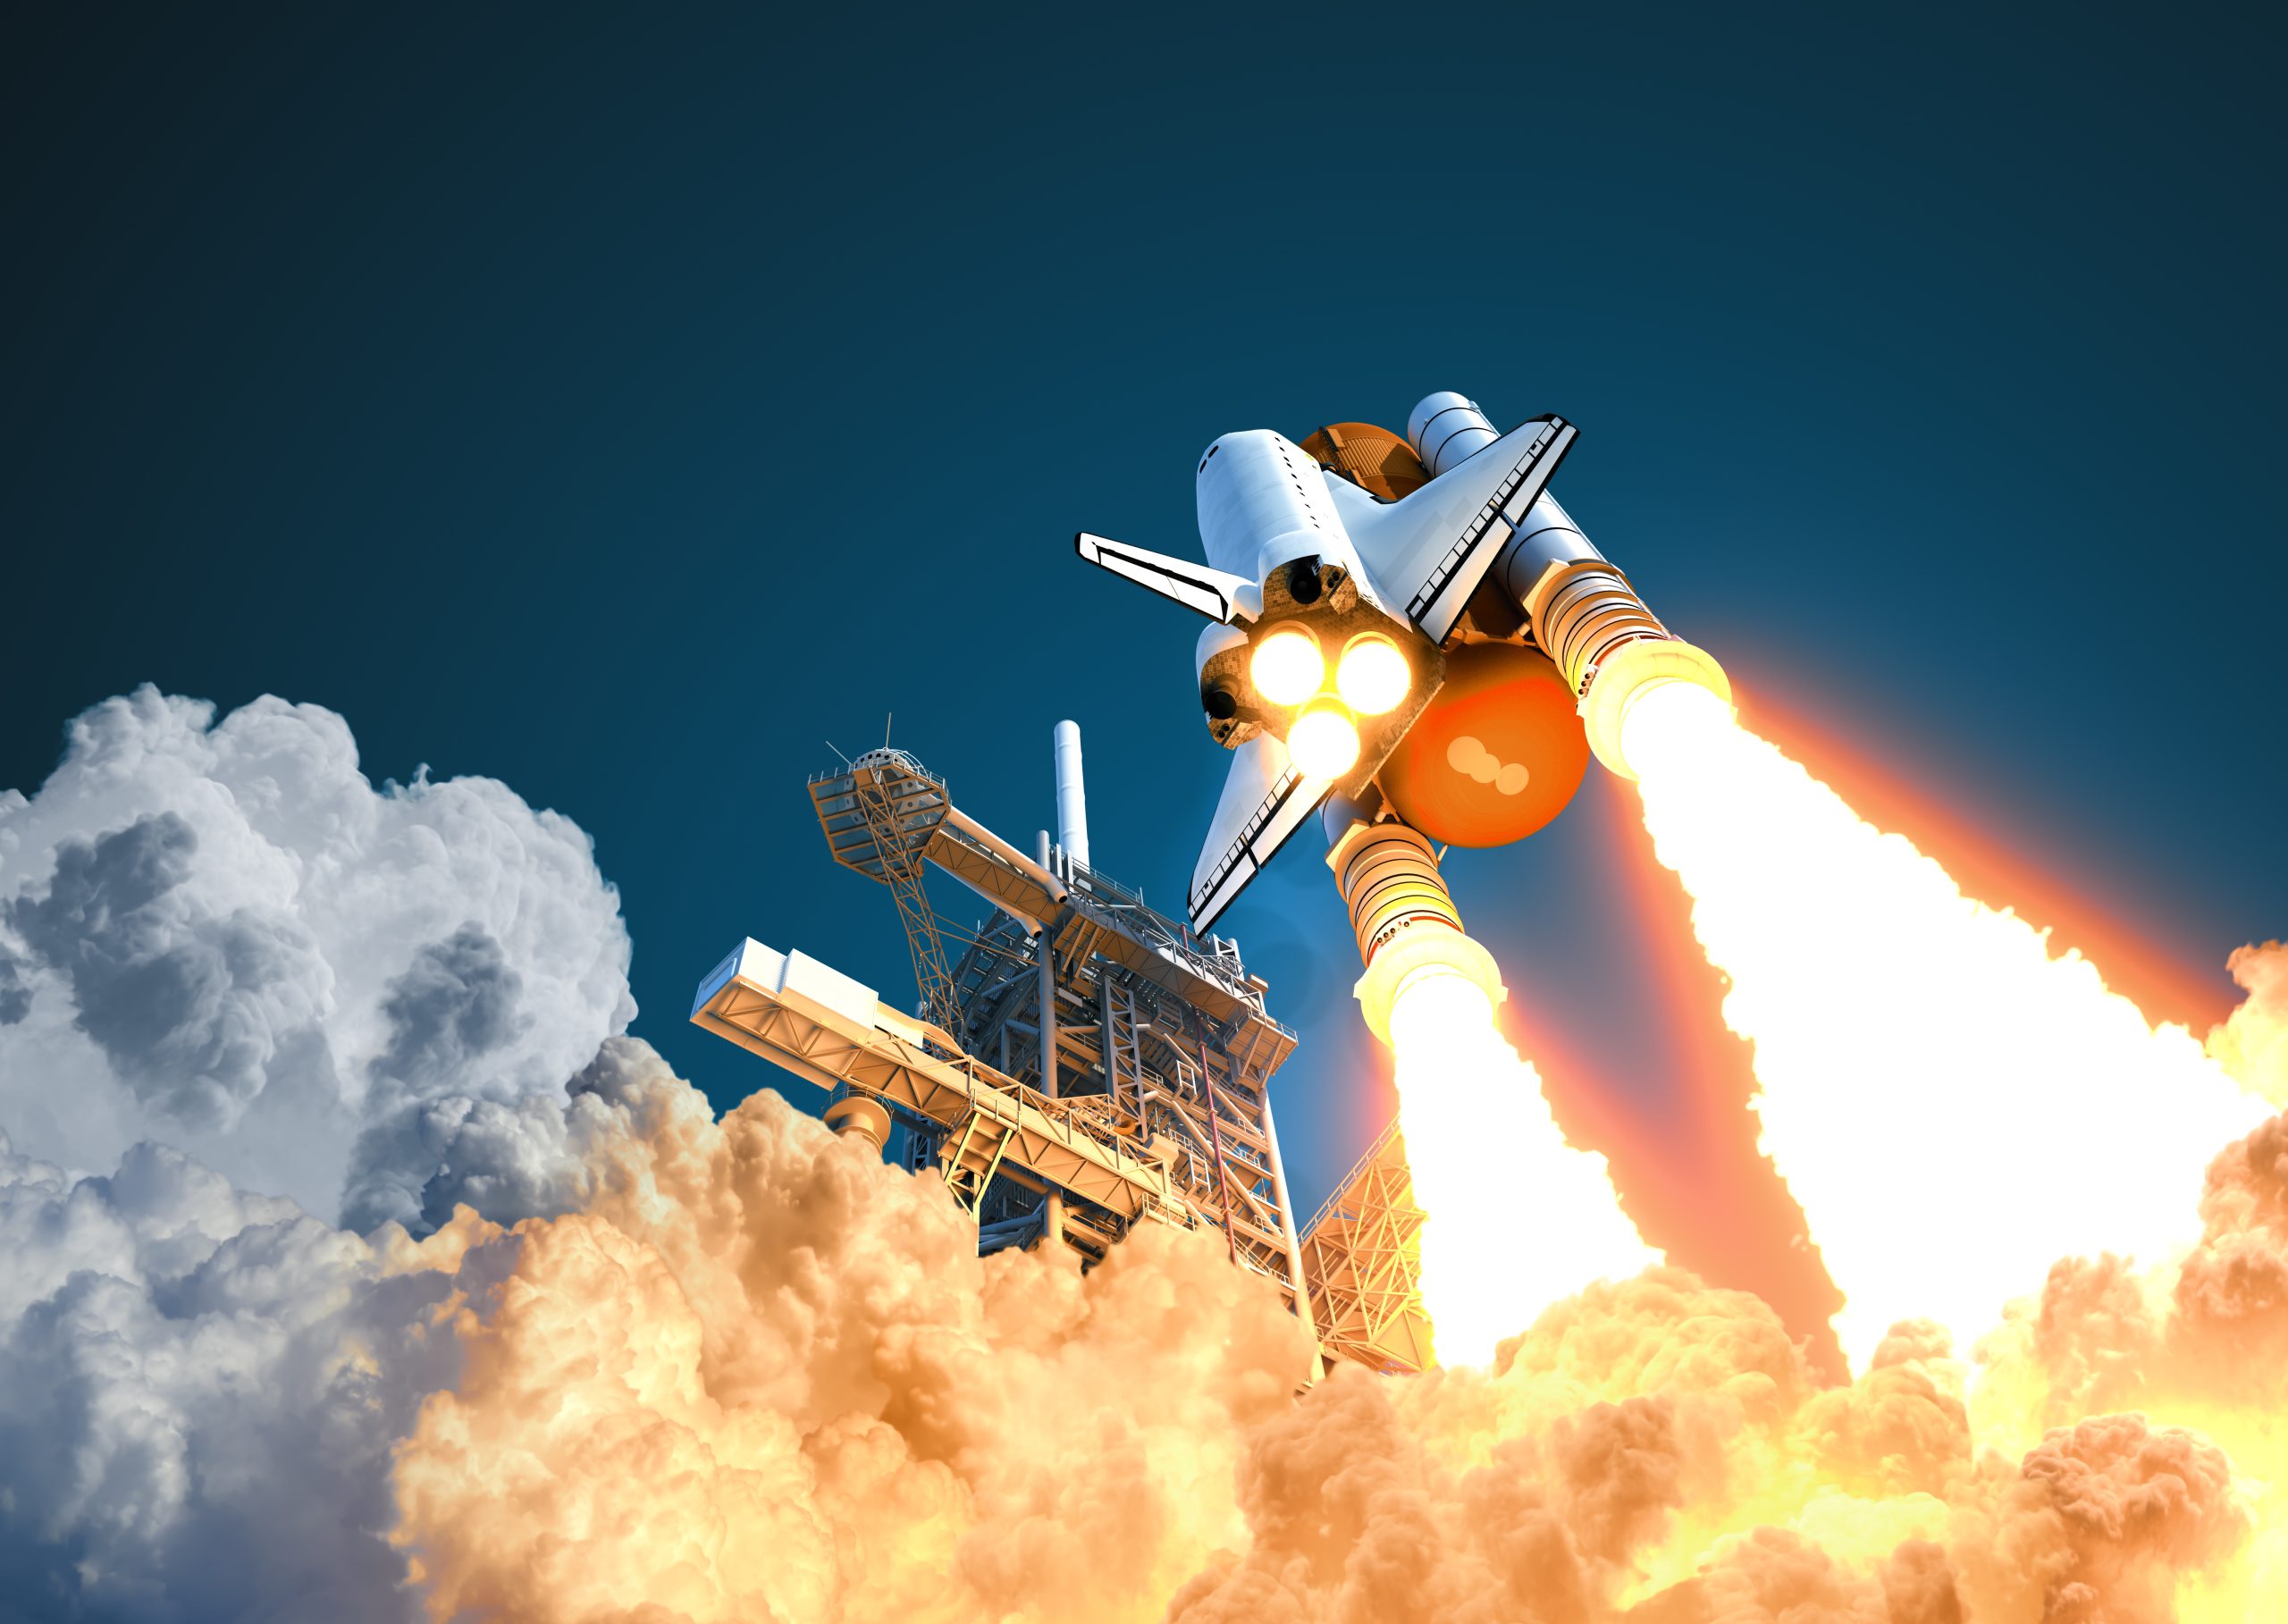 Space shuttle launching into space - sign up to start your beyond journey